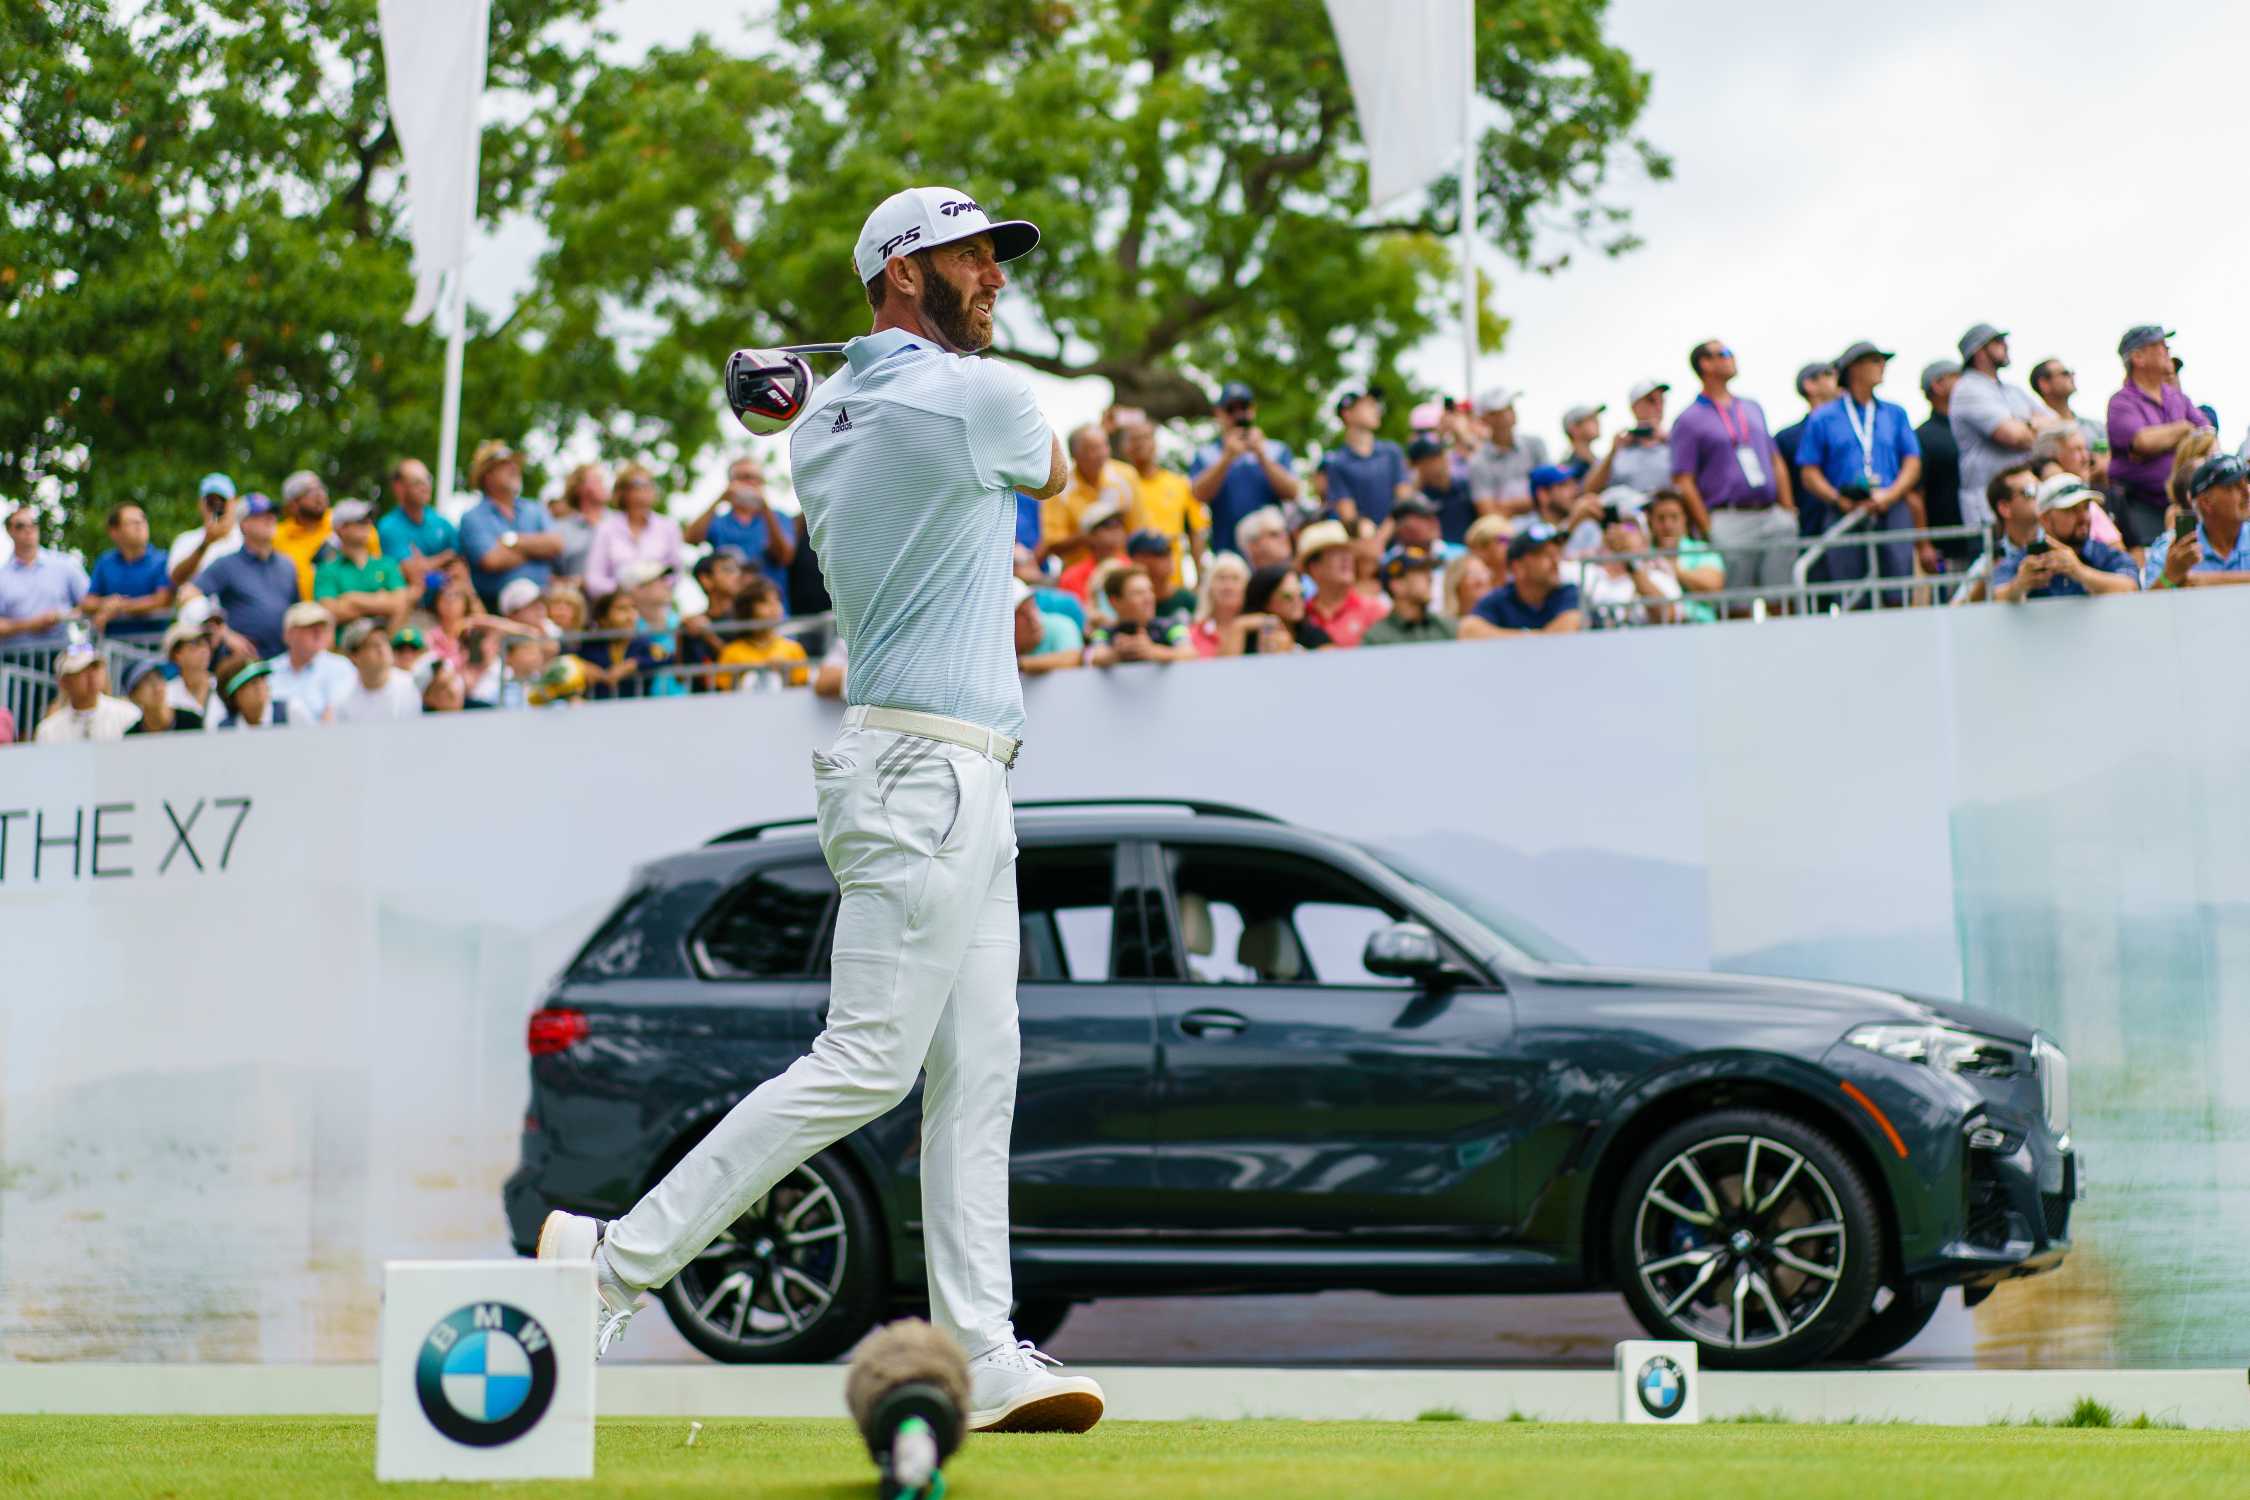 Bmw Championship 2020 The Top 70 Players On The Pga Tour Tee Off In Chicago With Qualification For The Season Finale At Stake